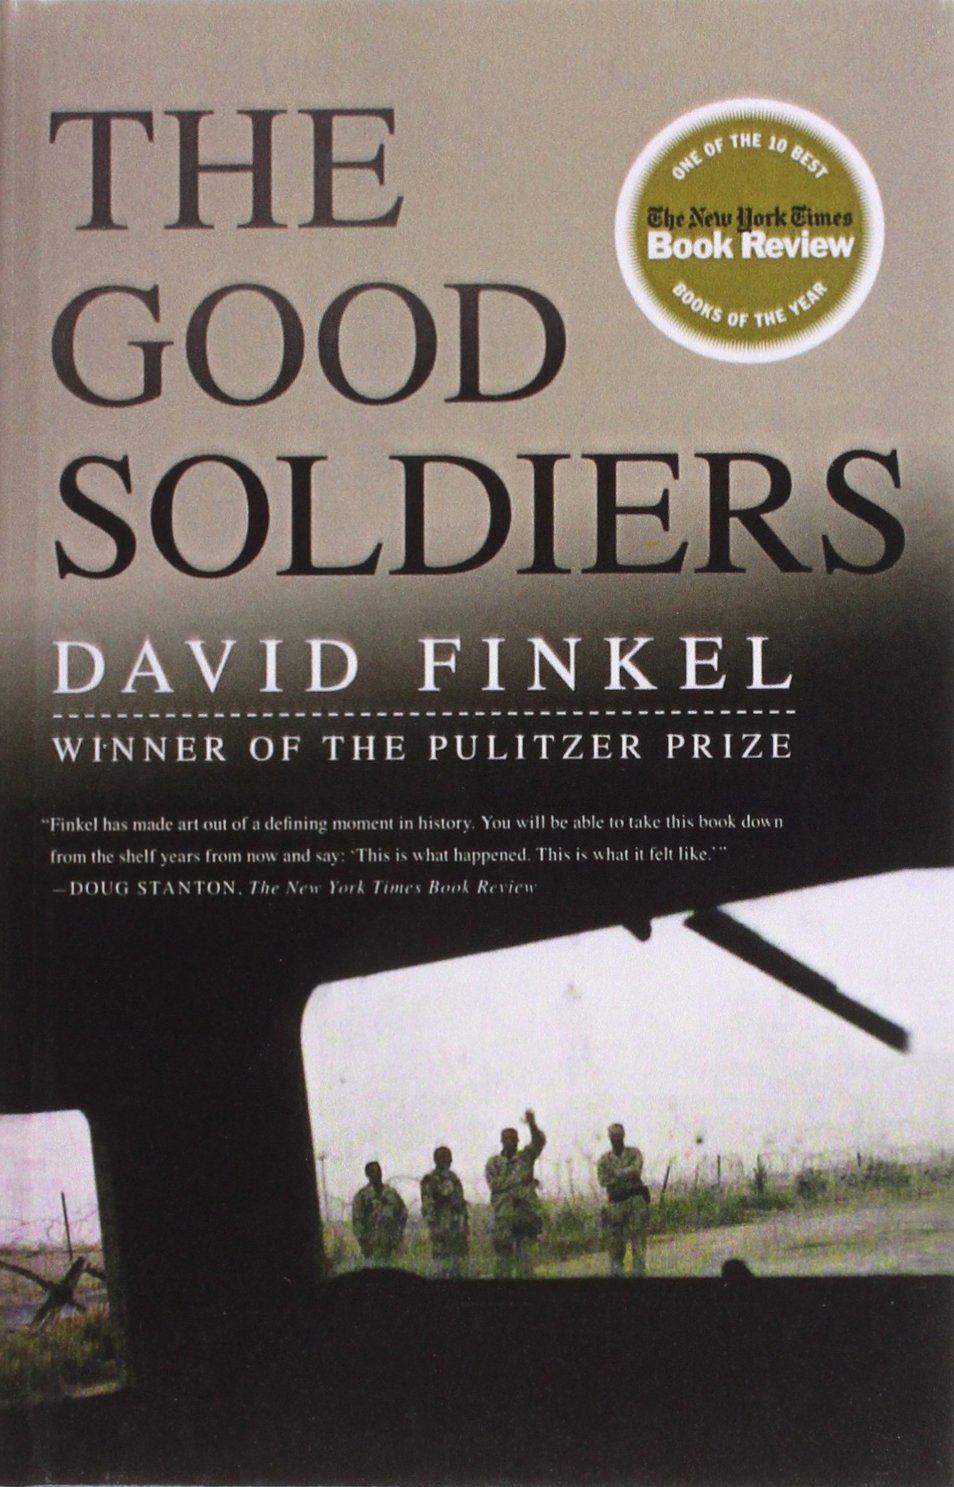 'The Good Soldiers' by David Finkel